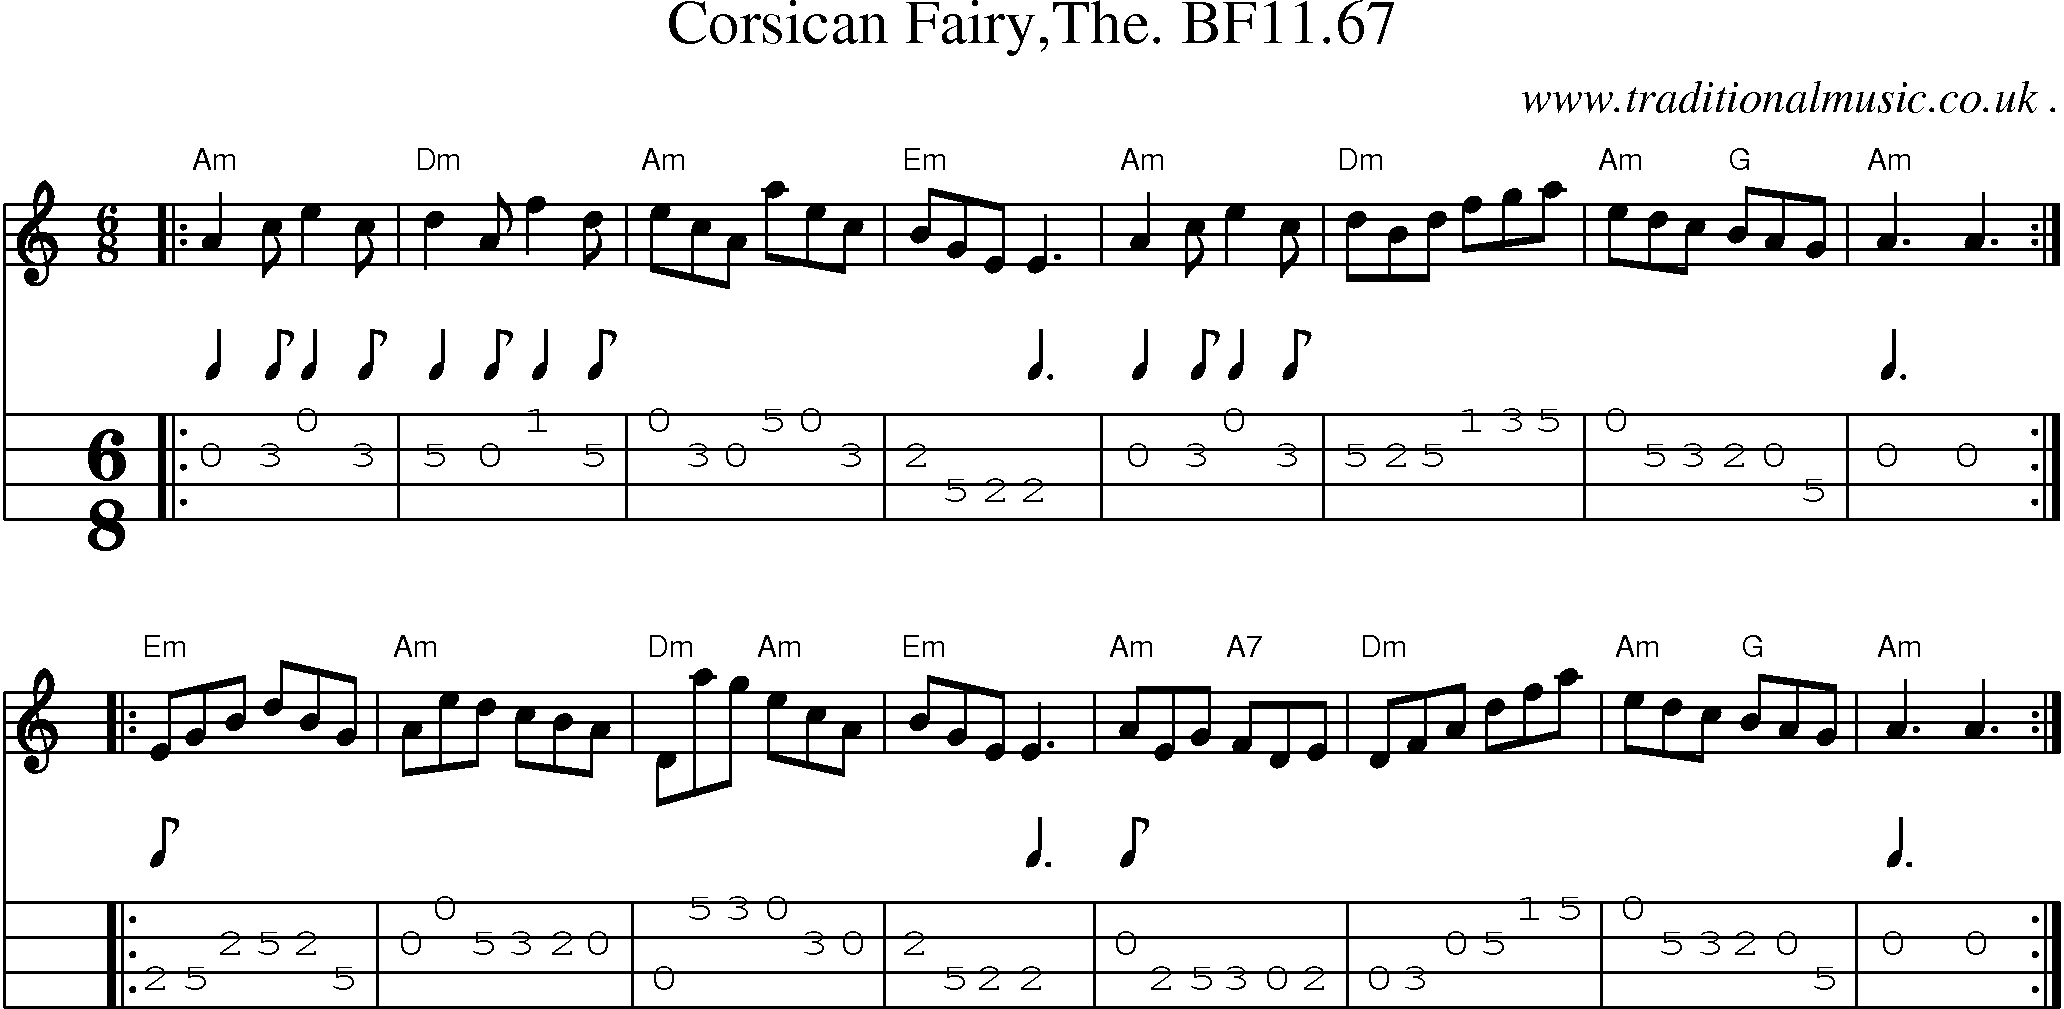 Sheet-music  score, Chords and Mandolin Tabs for Corsican Fairythe Bf1167